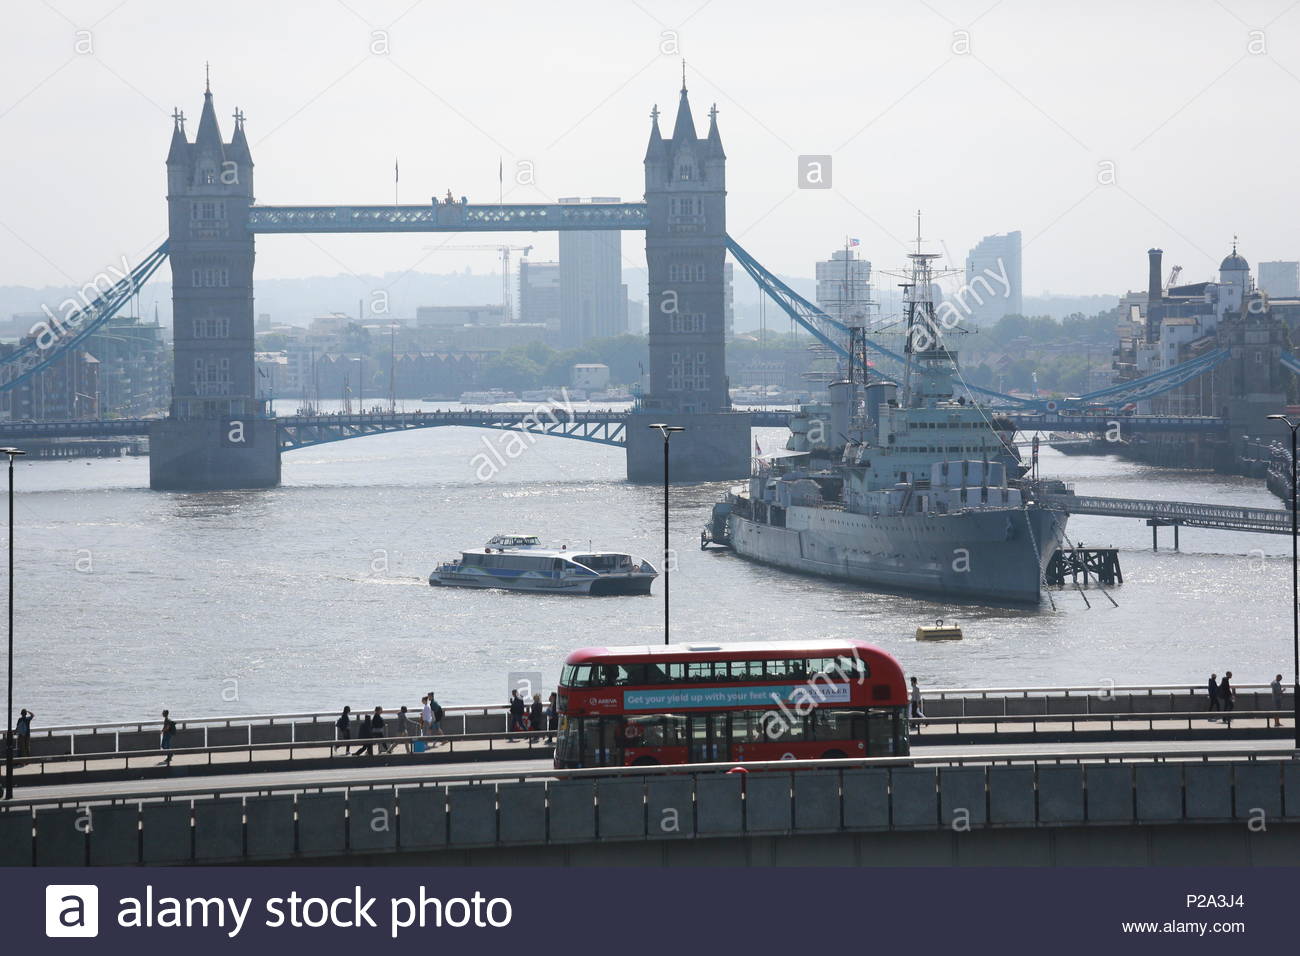 There was glorious weather in London this morning as early grey skies cleared and brought sunshine to the banks of the Thames. Stock Photo